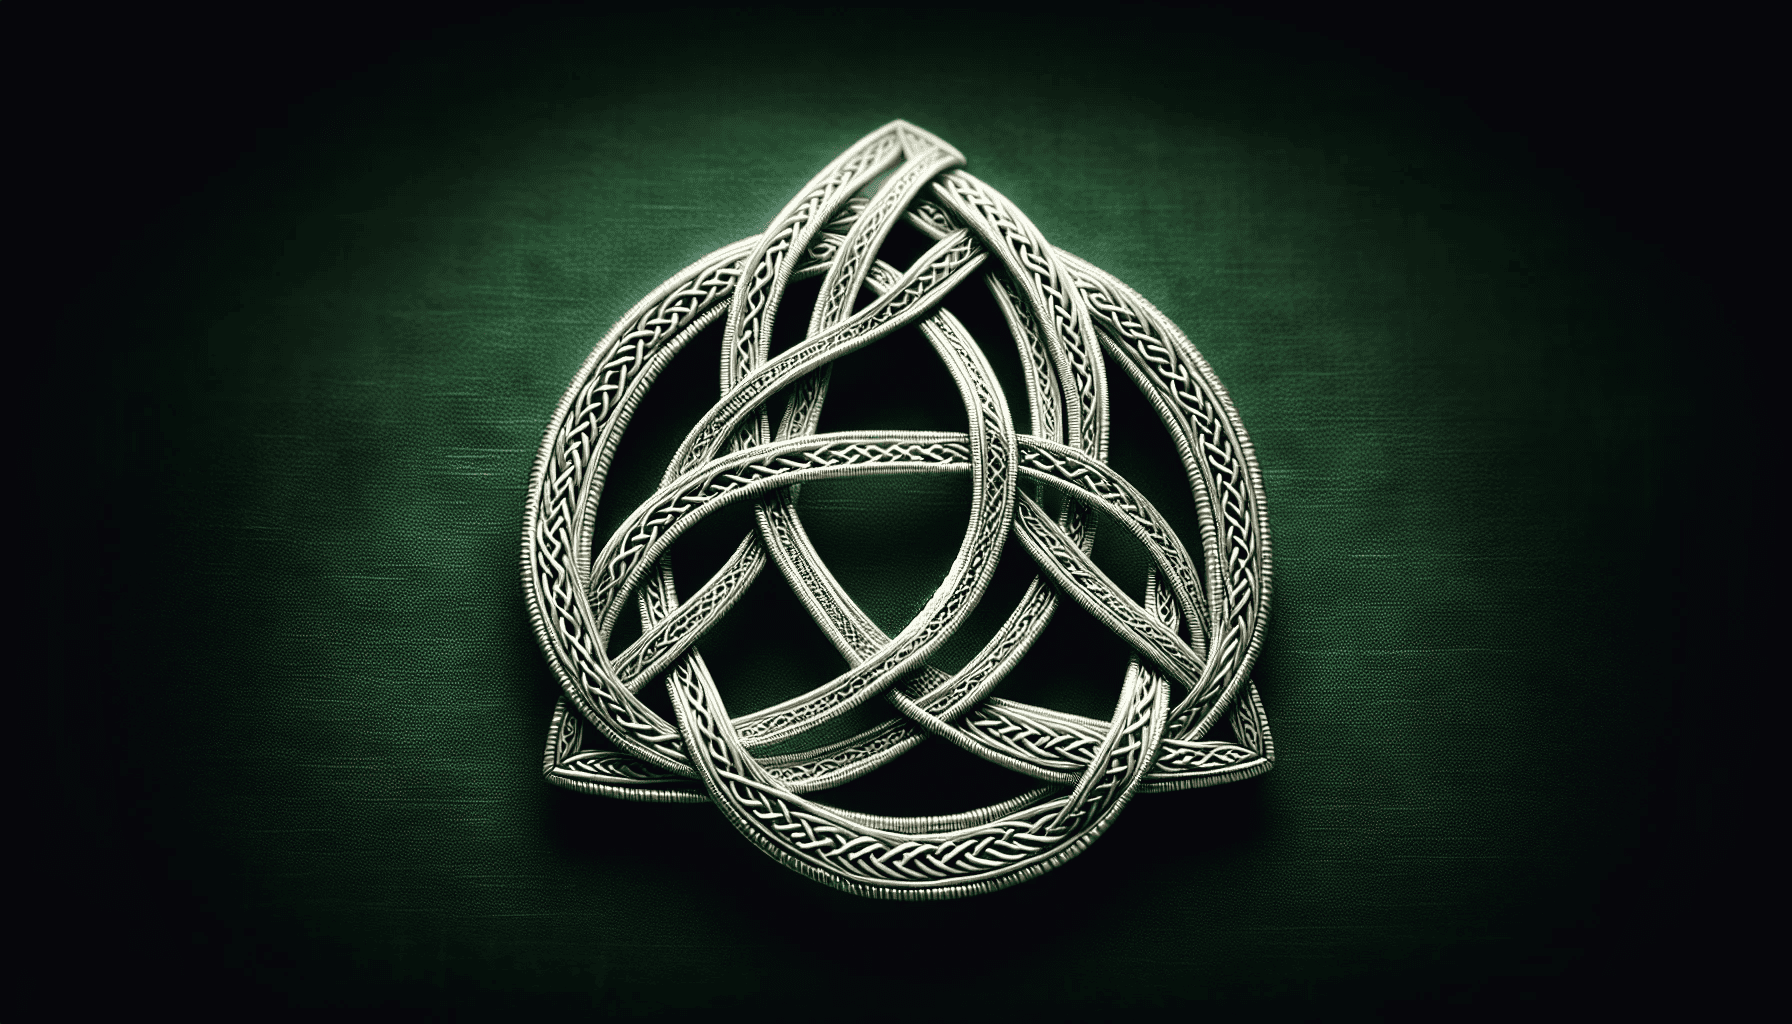 Celtic knotwork artistry with trinity knot symbolism